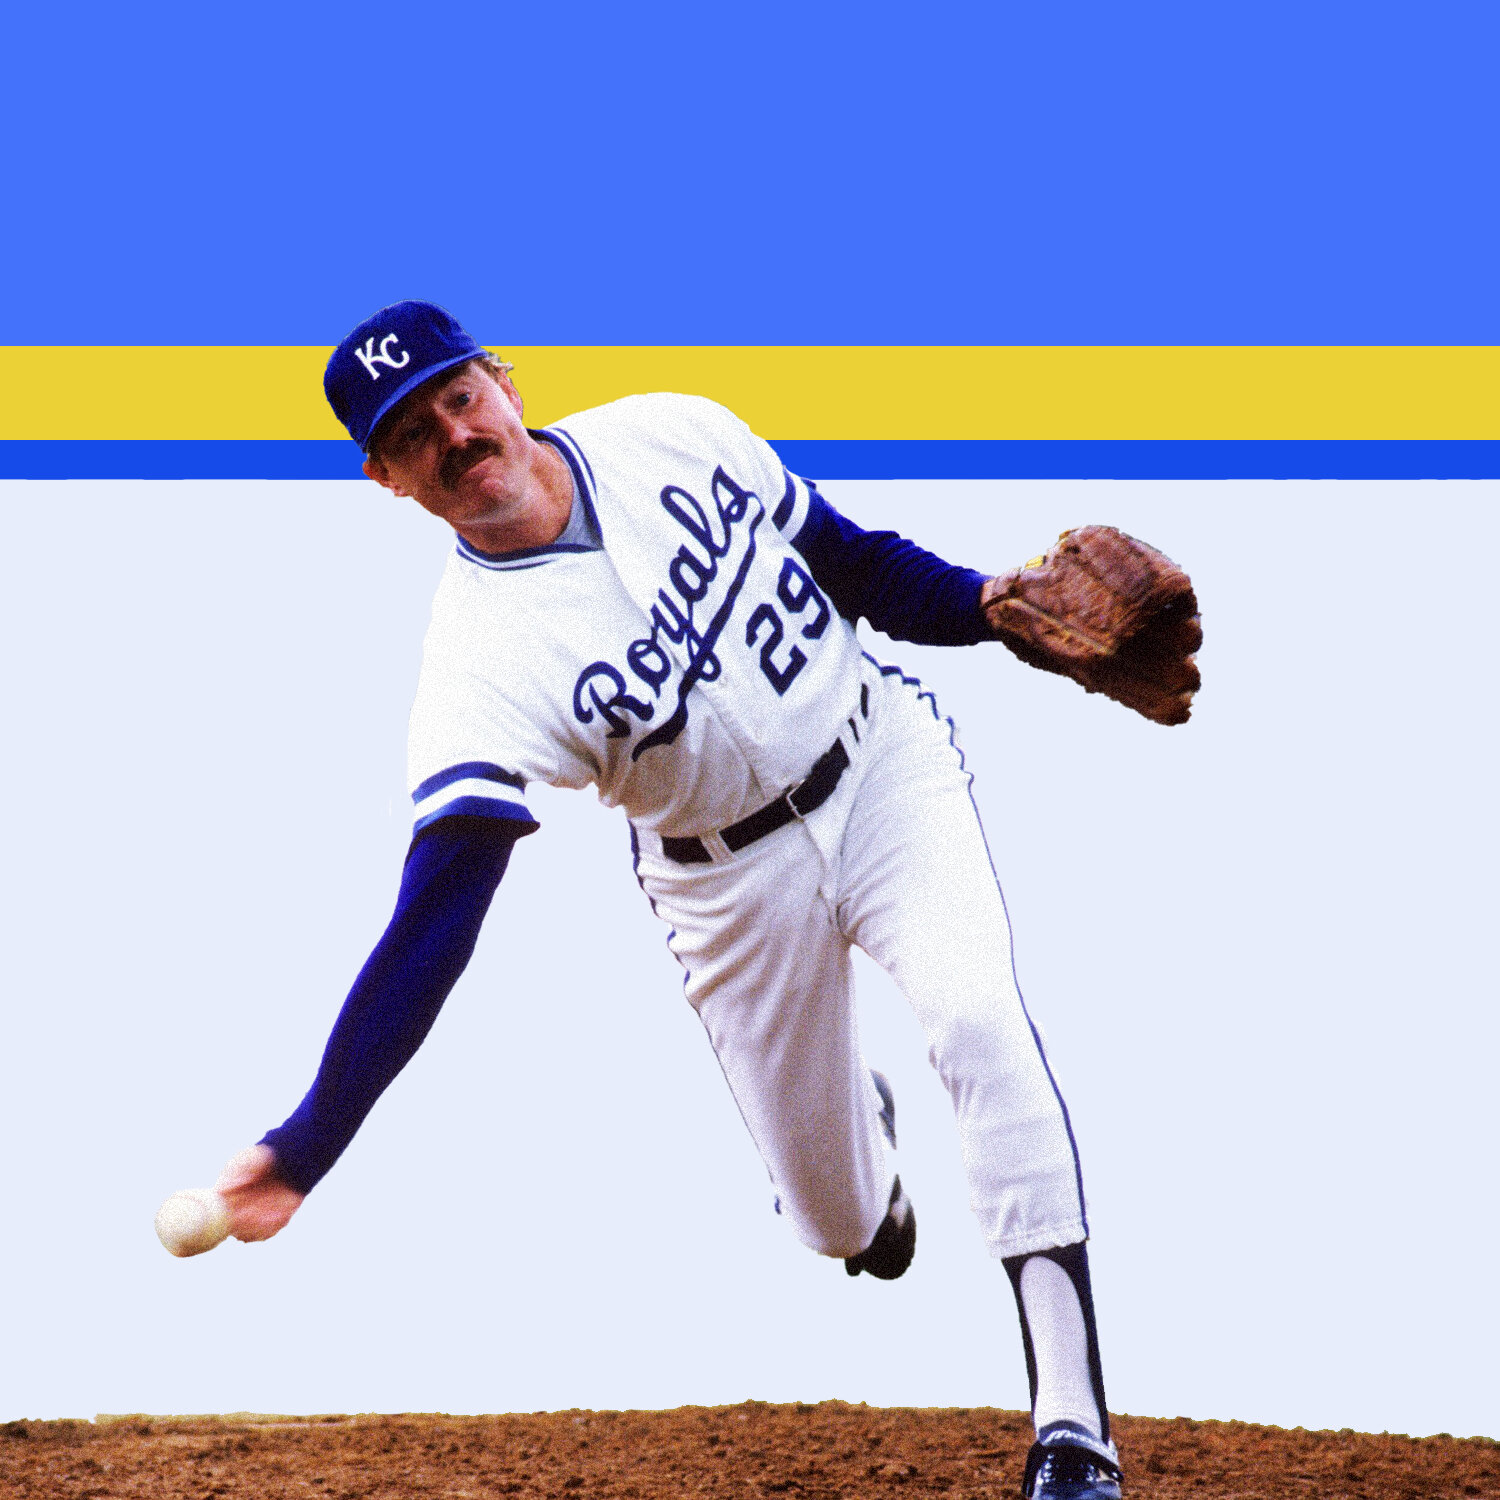 Rolaids Relief Man of The Year - Dan Quisenberry — The Amazing Blaze Zine